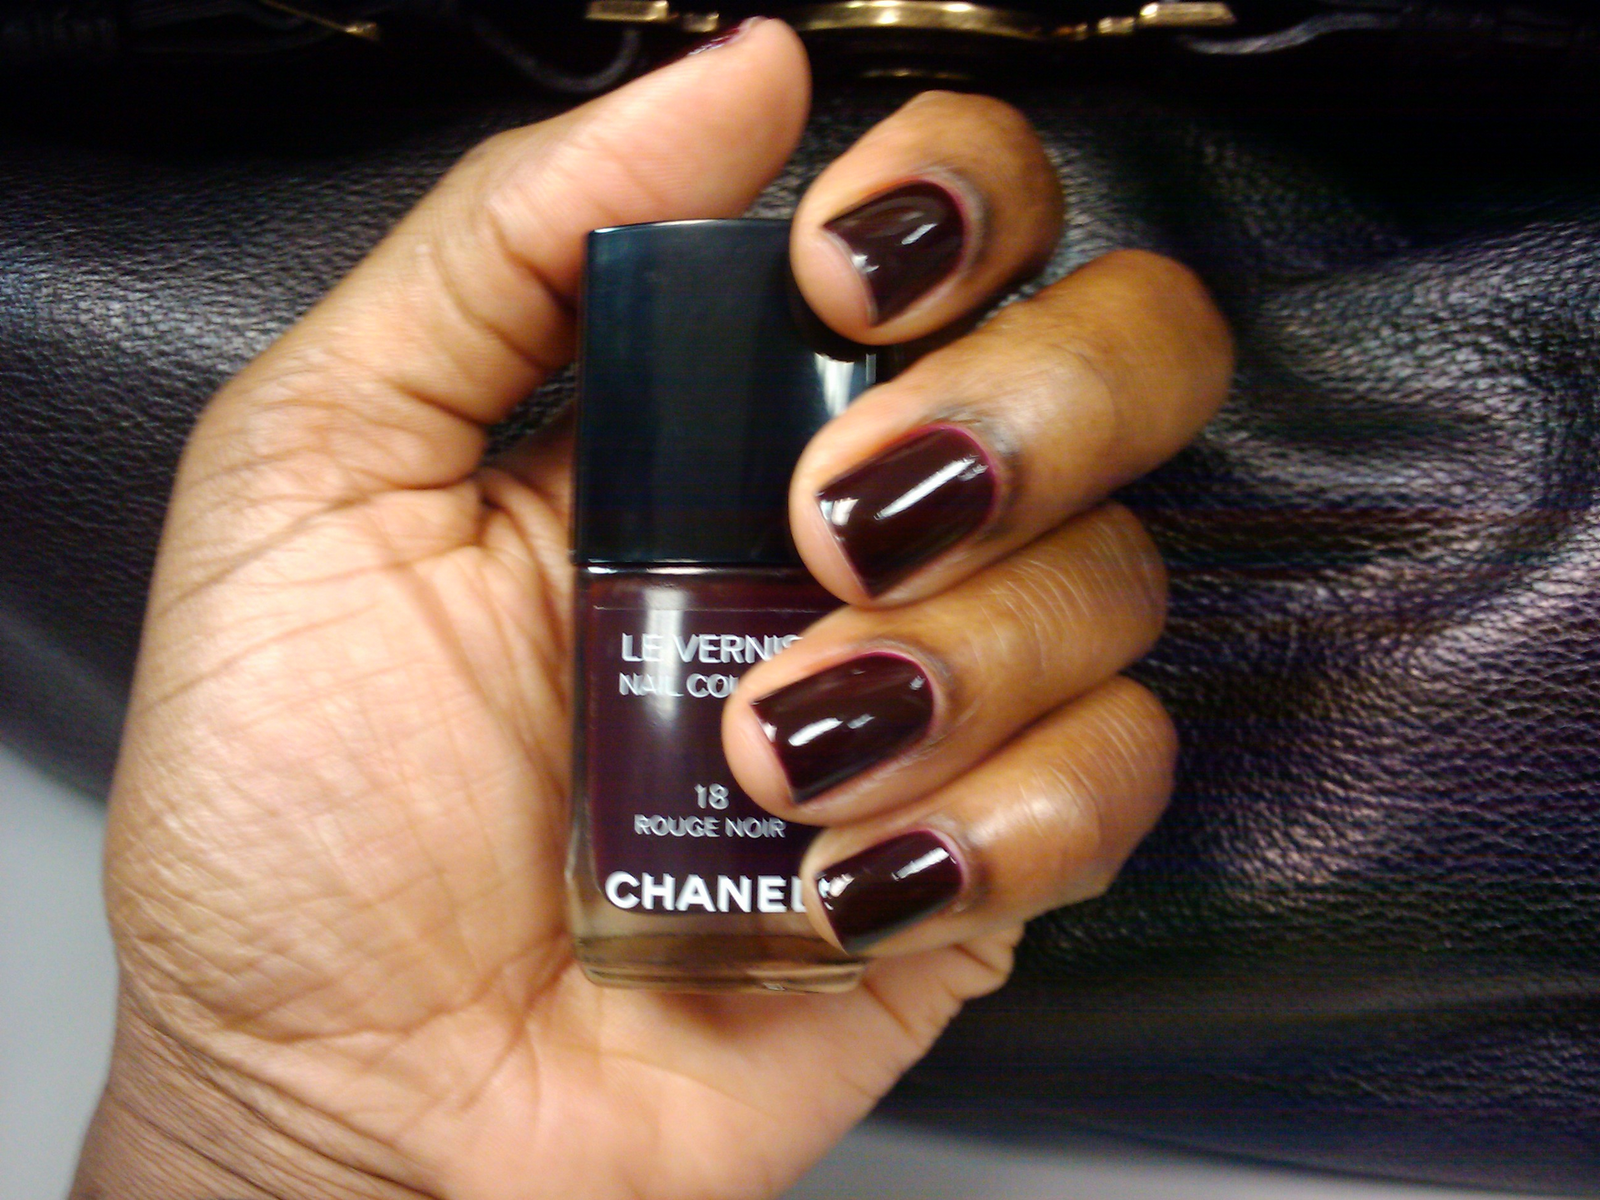 CHANEL Rouge Noir / ESSIE Lacy not Racy